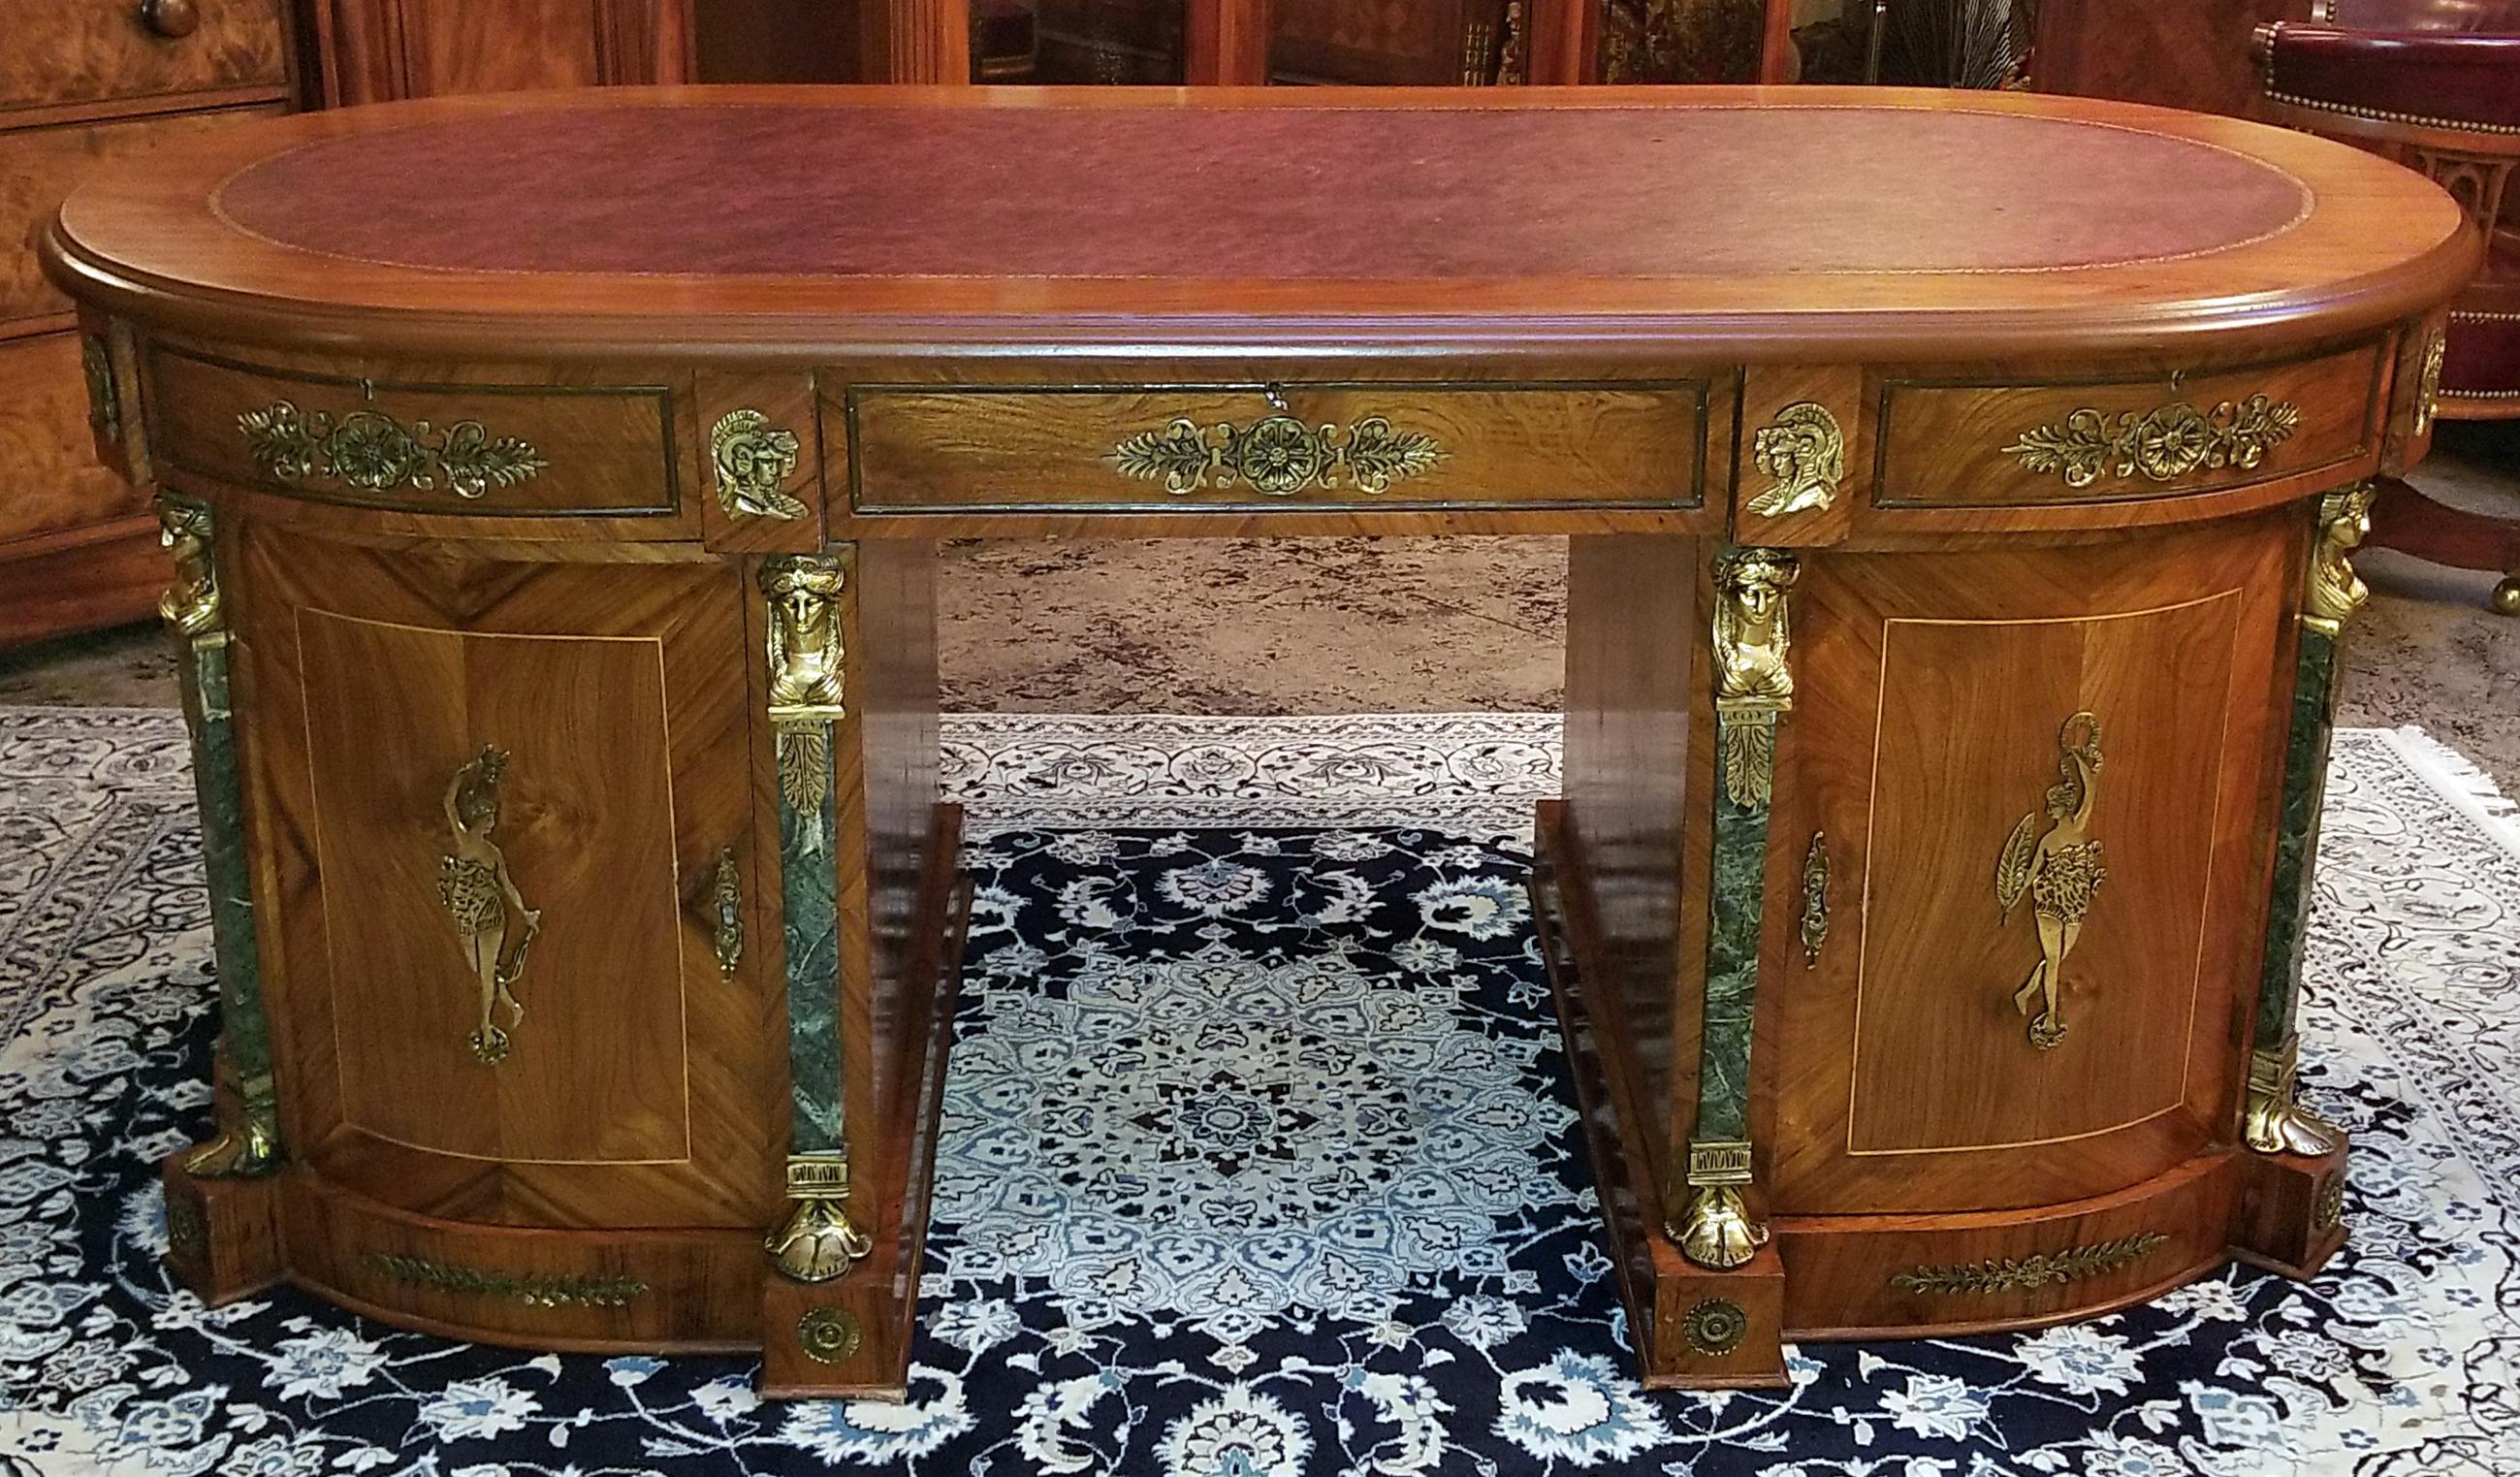 Presenting a fabulous Egyptian Classical Revival desk from the mid-20th century.

From circa 1970.

This is what is known as an Egyptian made desk in the neoclassical revival style, complete with ormolu neoclassical figures and heads, marble